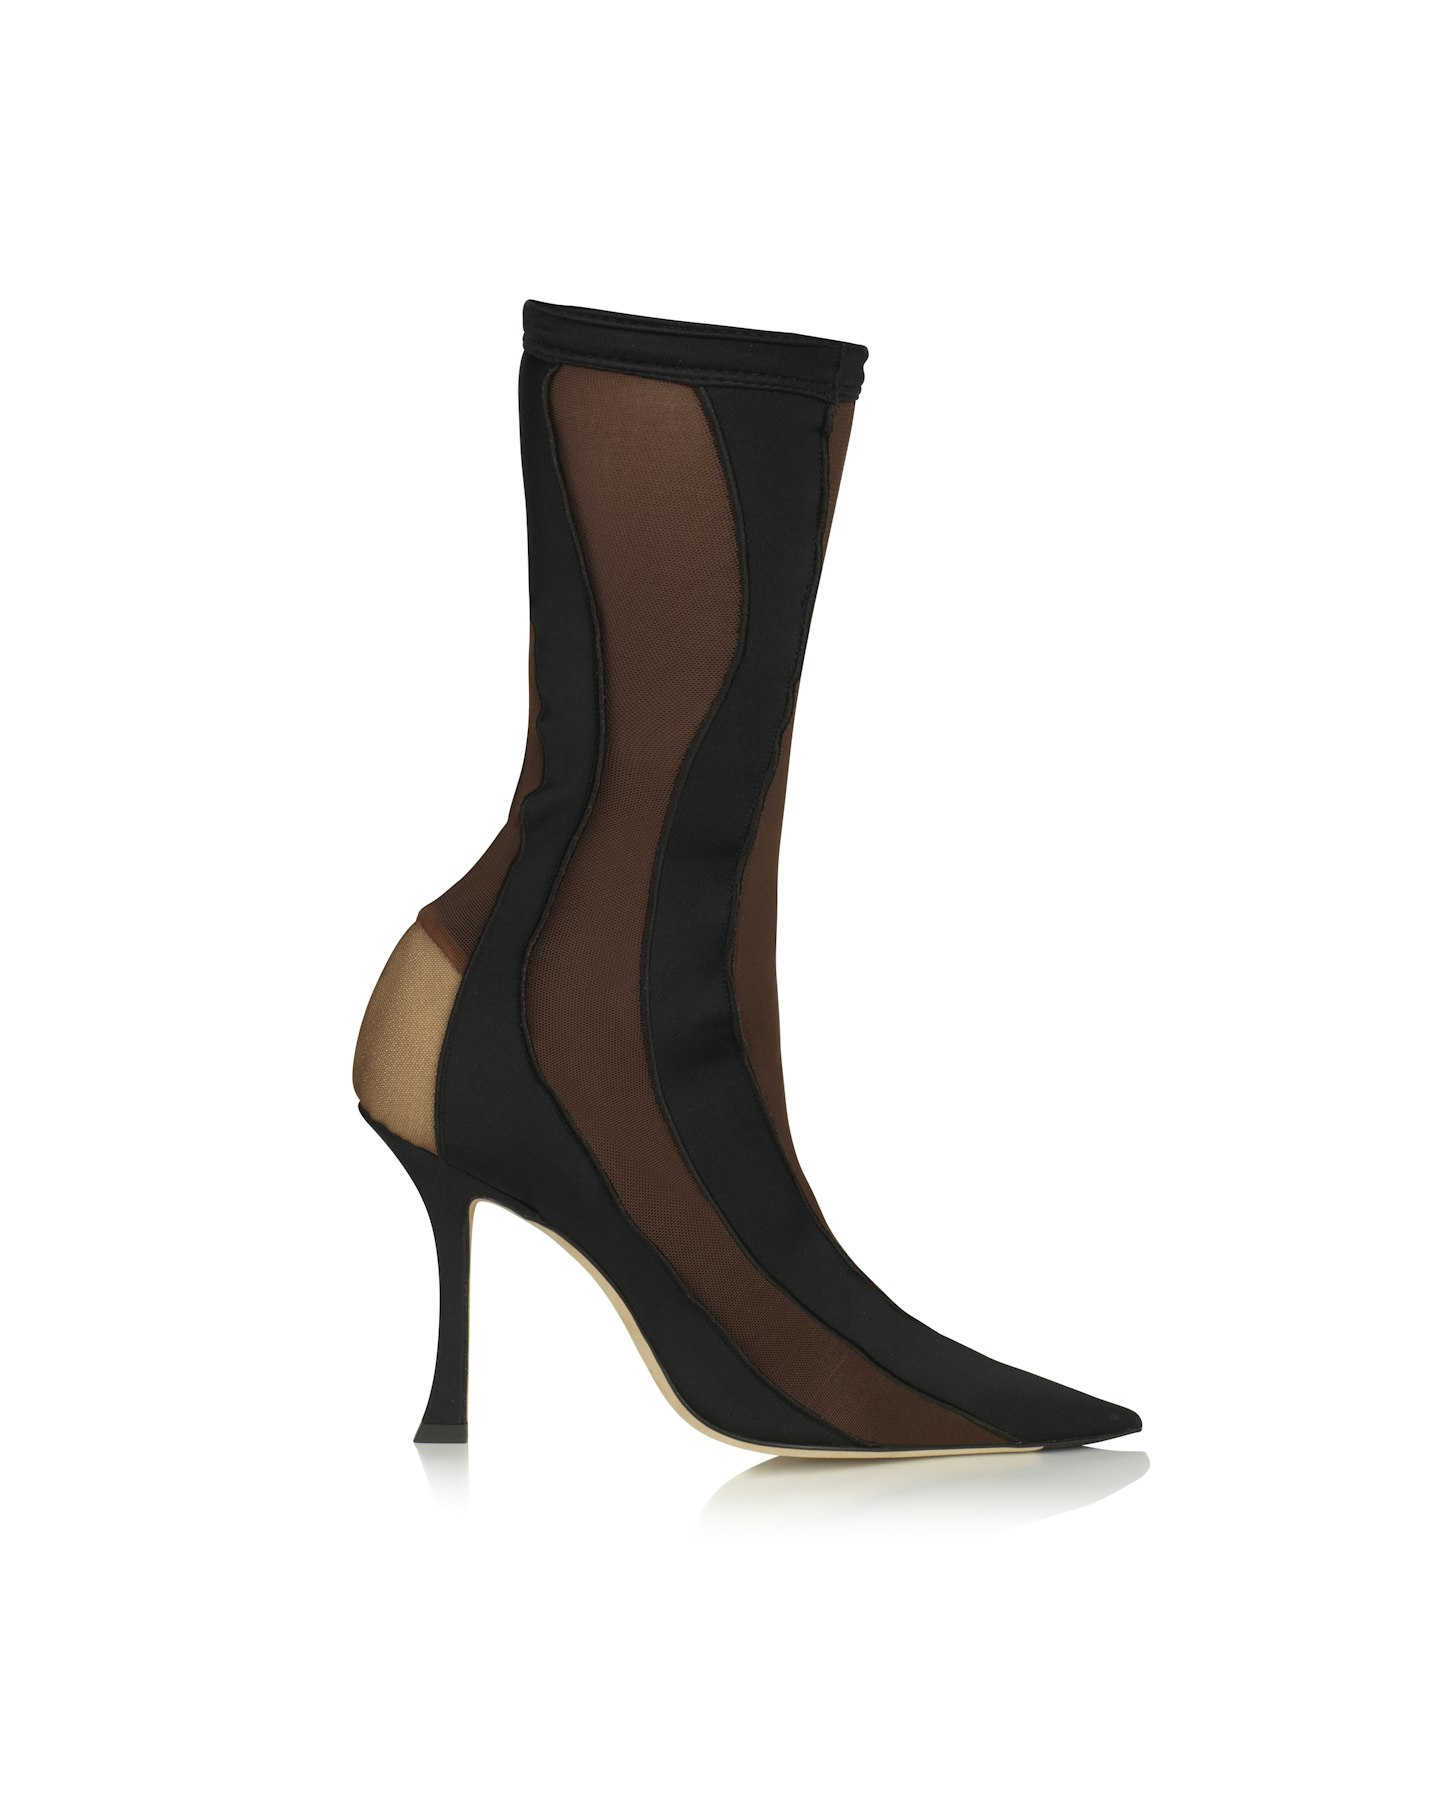 Jimmy Choo Mugler Black and Dark Nude Sheer Spiral Stretch Fabric Sock Ankle Boots, £1,050